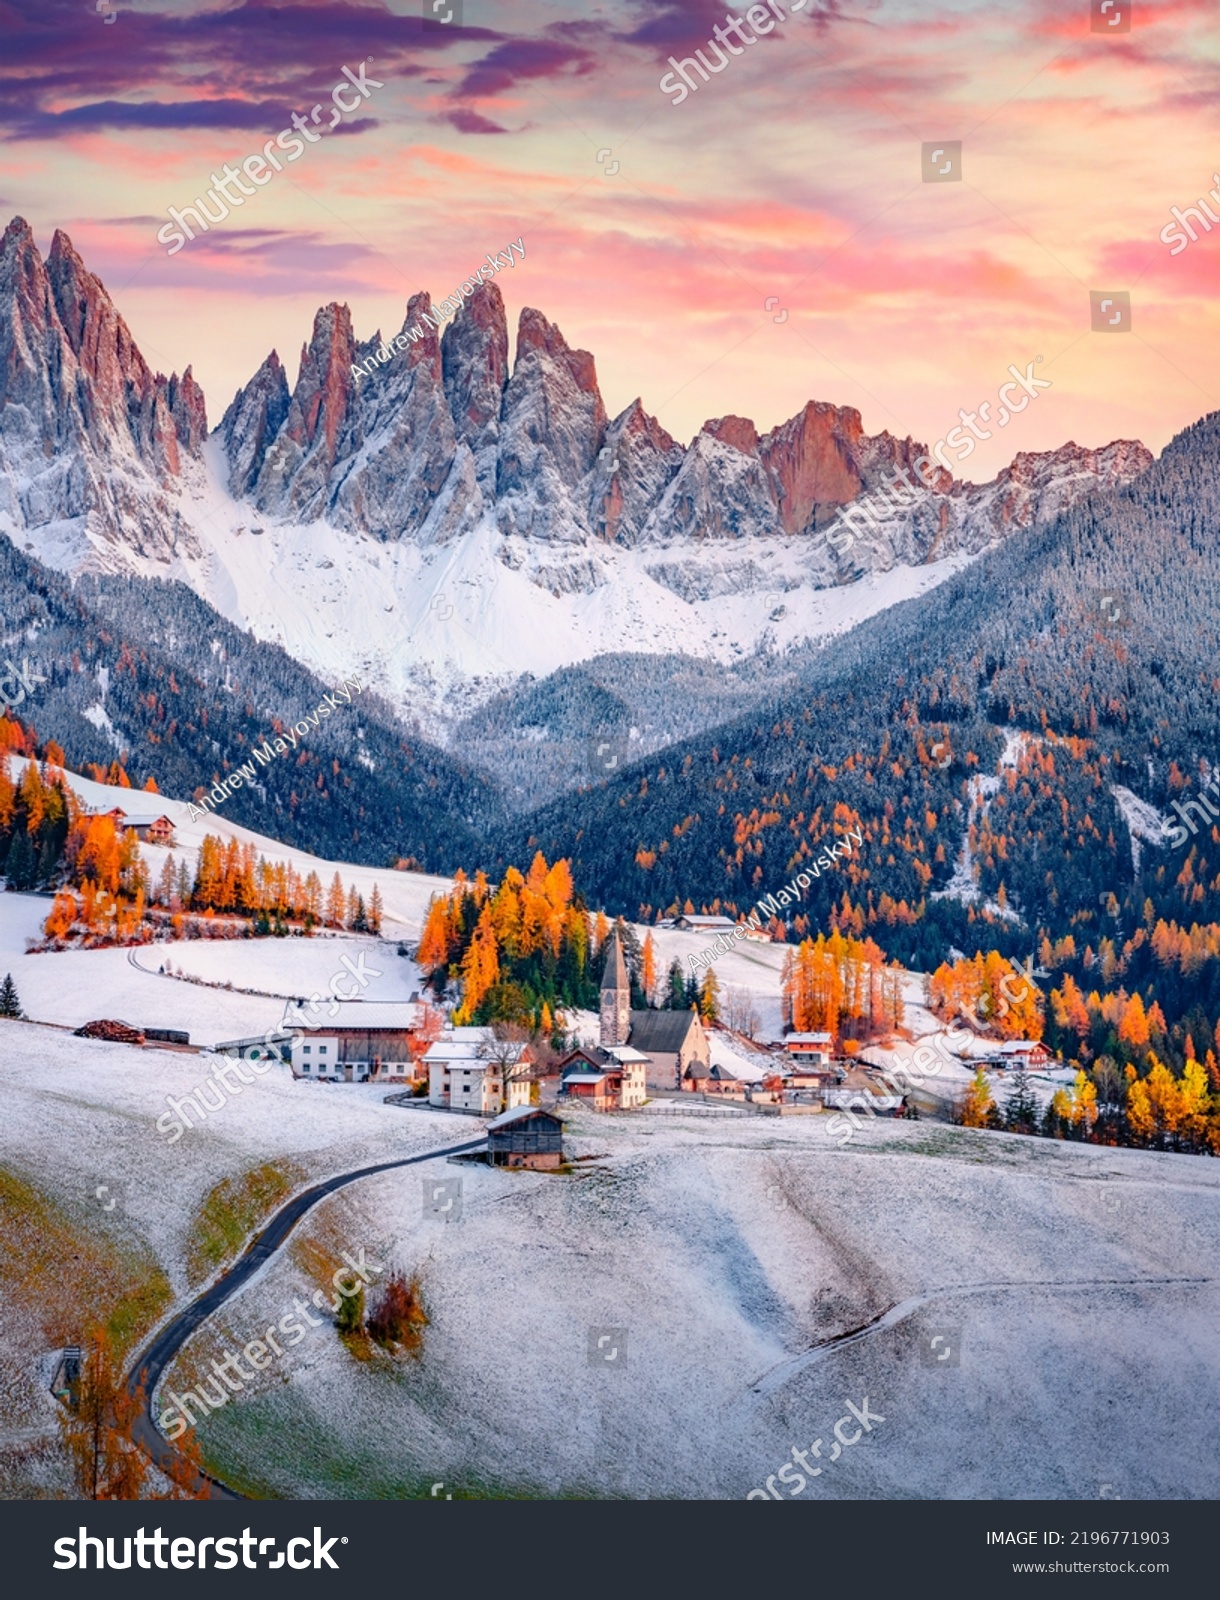 Fresh snow covered green hills on Santa Magdalena village. Fantastic autumn view of Seceda peak. Incredible landscape of Dolomite Alps, Italy. Traveling concept background. #2196771903